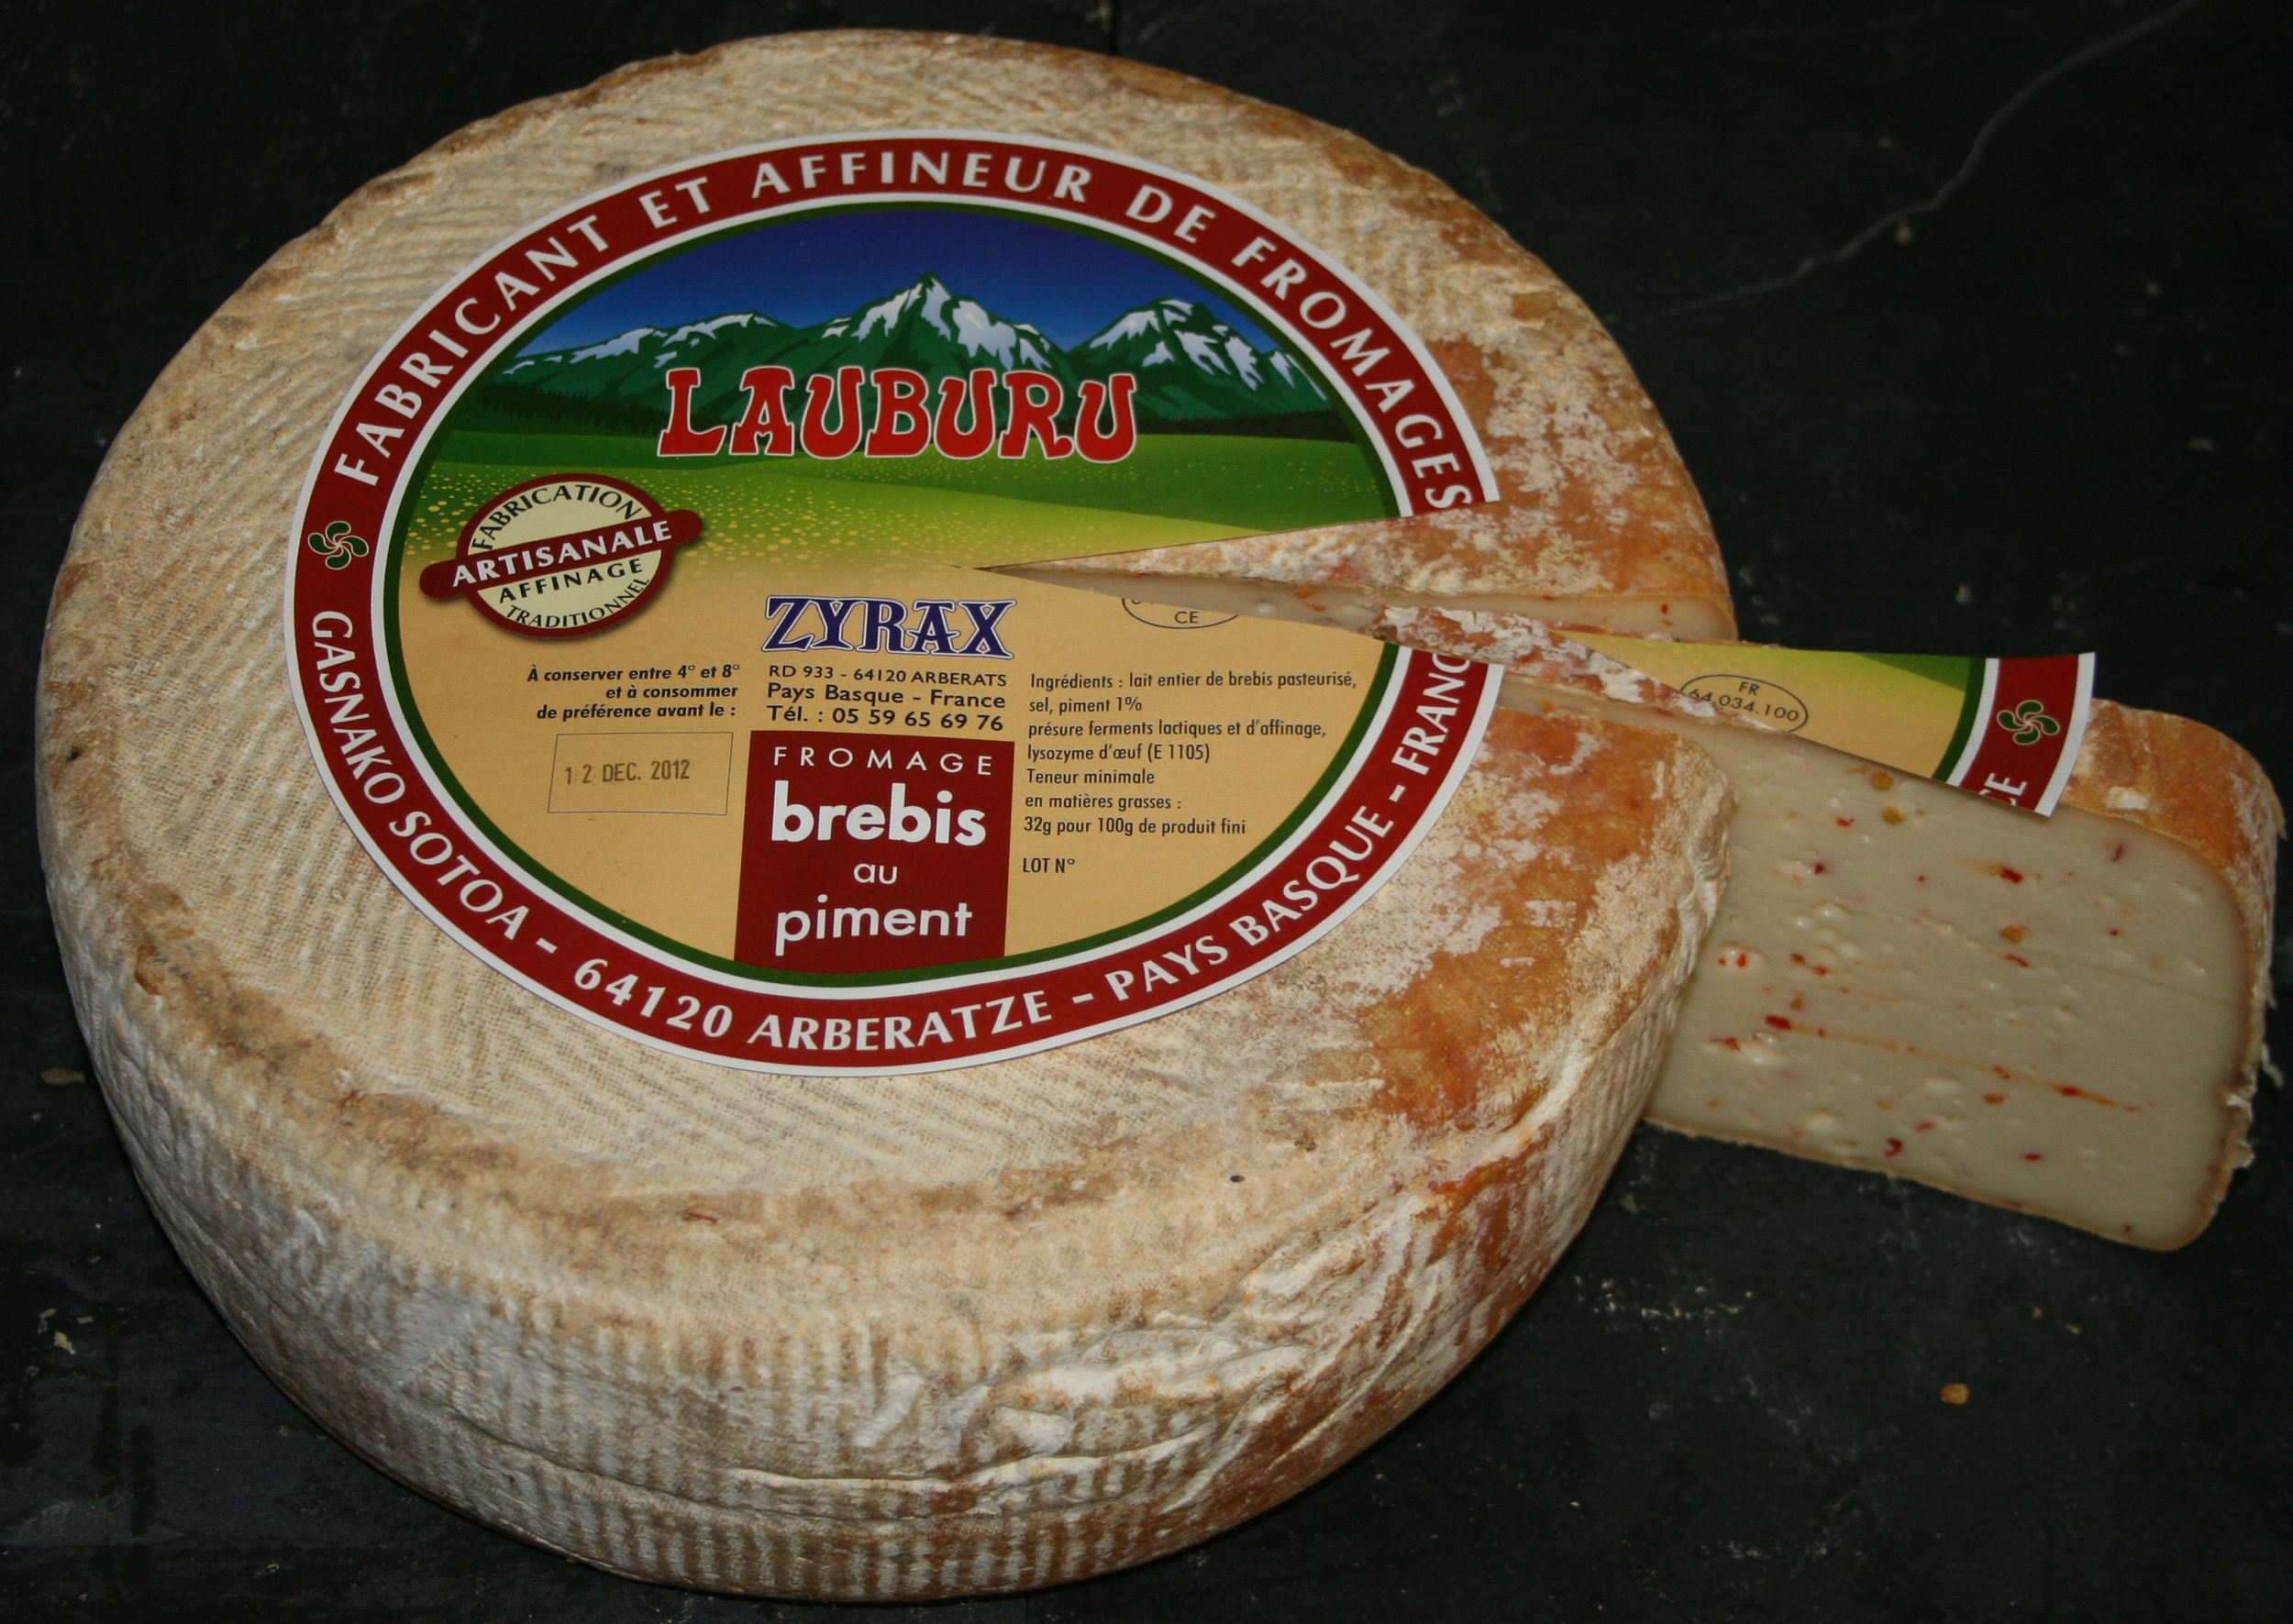 BREBIS PIMENT-zyrax fromage-www.luxfood-shop.fr